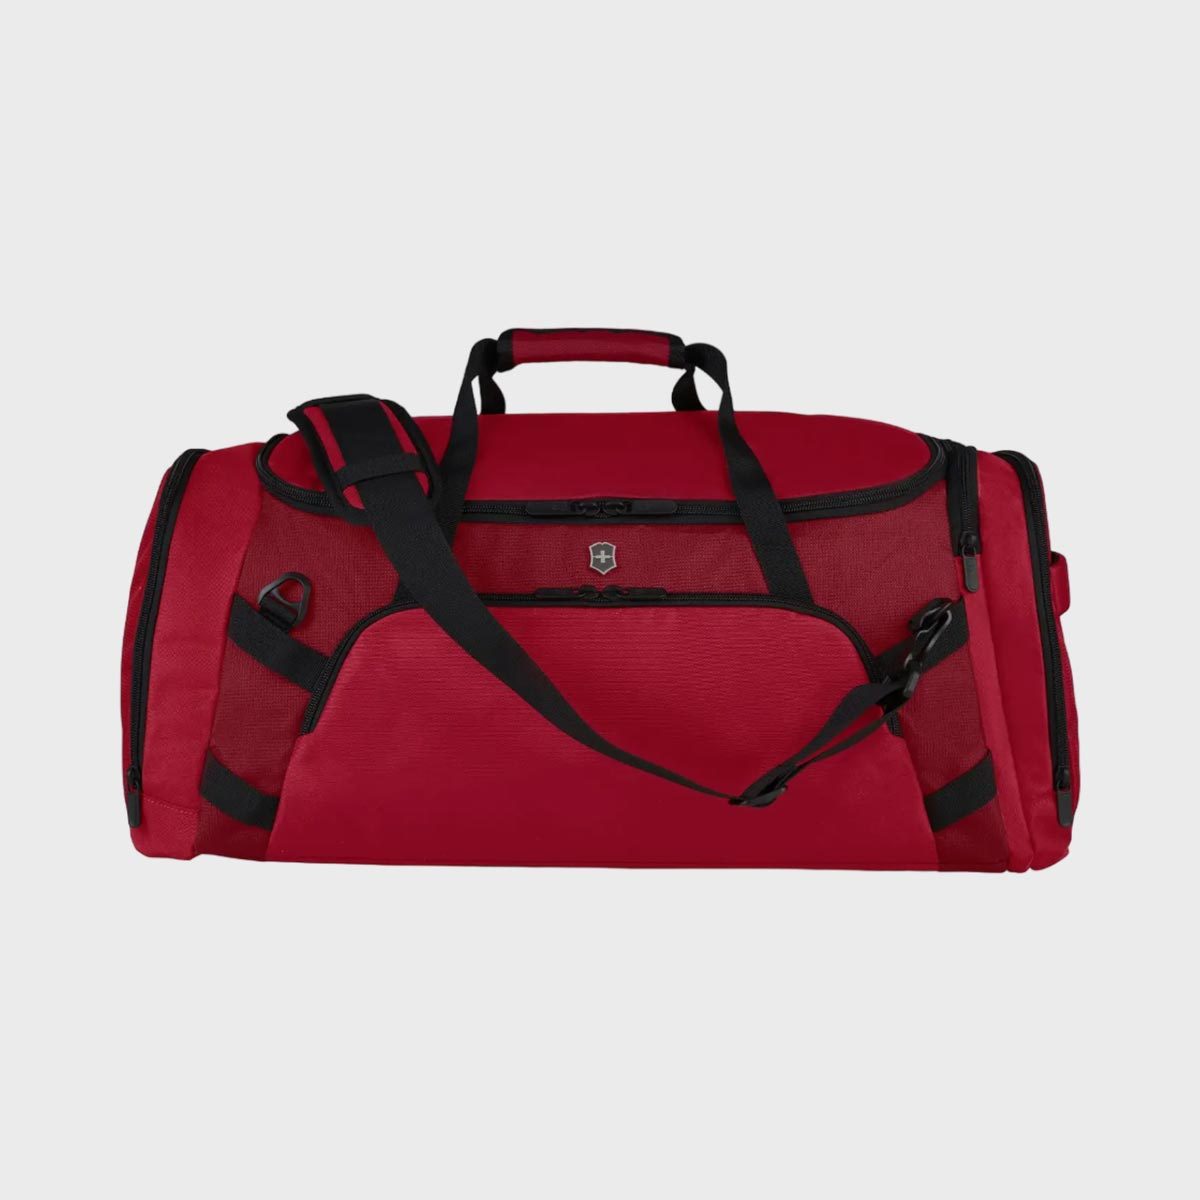 <h3 class="">Victorinox VX Sport Evo Two-in-One Backpack/Duffel</h3> <p>From the brand that created the original Swiss Army Knife, Victorinox brings the same ingenuity and clever functionality to its range of travel gear. A trusty duffle bag gets an upgrade with this convertible carryall that we're calling the best large backpack for travel. With a focus on practicality, durability and comfort, this <a href="https://www.victorinox.com/us/en/Products/Travel-Gear/Backpacks-Messengers/VX-Sport-EVO-2-in-1-Backpack-Duffel/p/611420" rel="noopener">two-in-one backpack/duffel</a> is an indispensable companion for navigating any journey, near or far.</p> <p>Hidden straps convert the duffle into a backpack and allow for hands-free cruising, whether you're racing for a flight or meandering on an outdoor expedition. Crafted from extra-tough polyester, it holds up on outdoor adventures. Plus, handy multipurpose pockets offer versatile storage solutions to avoid <a href="https://www.rd.com/list/packing-mistakes/">packing mistakes</a>, including a separate space for shoes and compartments for electronics. It's a <a href="https://www.rd.com/list/smart-bags-airplanes/">smart bag</a> to have in your collection.</p> <p><strong>Pros</strong></p> <ul> <li>57-liter capacity</li> <li class="">Convertible multipurpose bag</li> <li class="">Adjustable padded backpack straps stow away when not in use</li> <li class="">Made of water-repellent fabric</li> <li class="">Has airflow channels in the padded back panels</li> </ul> <p><strong>Cons</strong></p> <ul> <li class="">Only two colors available</li> </ul> <p class="listicle-page__cta-button-shop"><a class="shop-btn" href="https://www.victorinox.com/us/en/Products/Travel-Gear/Backpacks-Messengers/VX-Sport-EVO-2-in-1-Backpack-Duffel/p/611420">Shop Now</a></p>